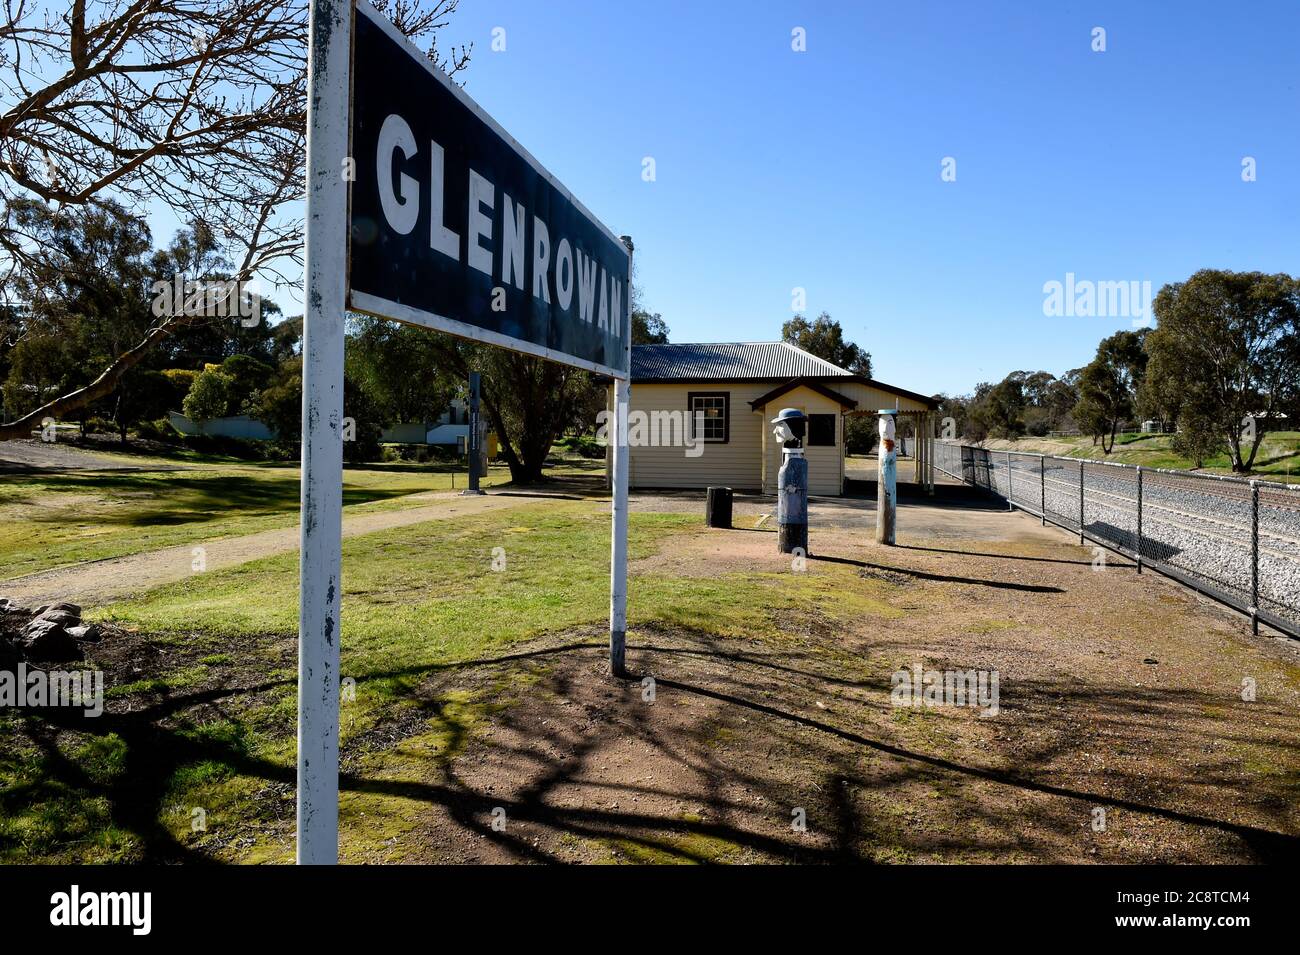 Glenrowan, Victoria. Glenrowan Station platform with station sign looking towards the station building, the wooden statues mark the position of police. Stock Photo